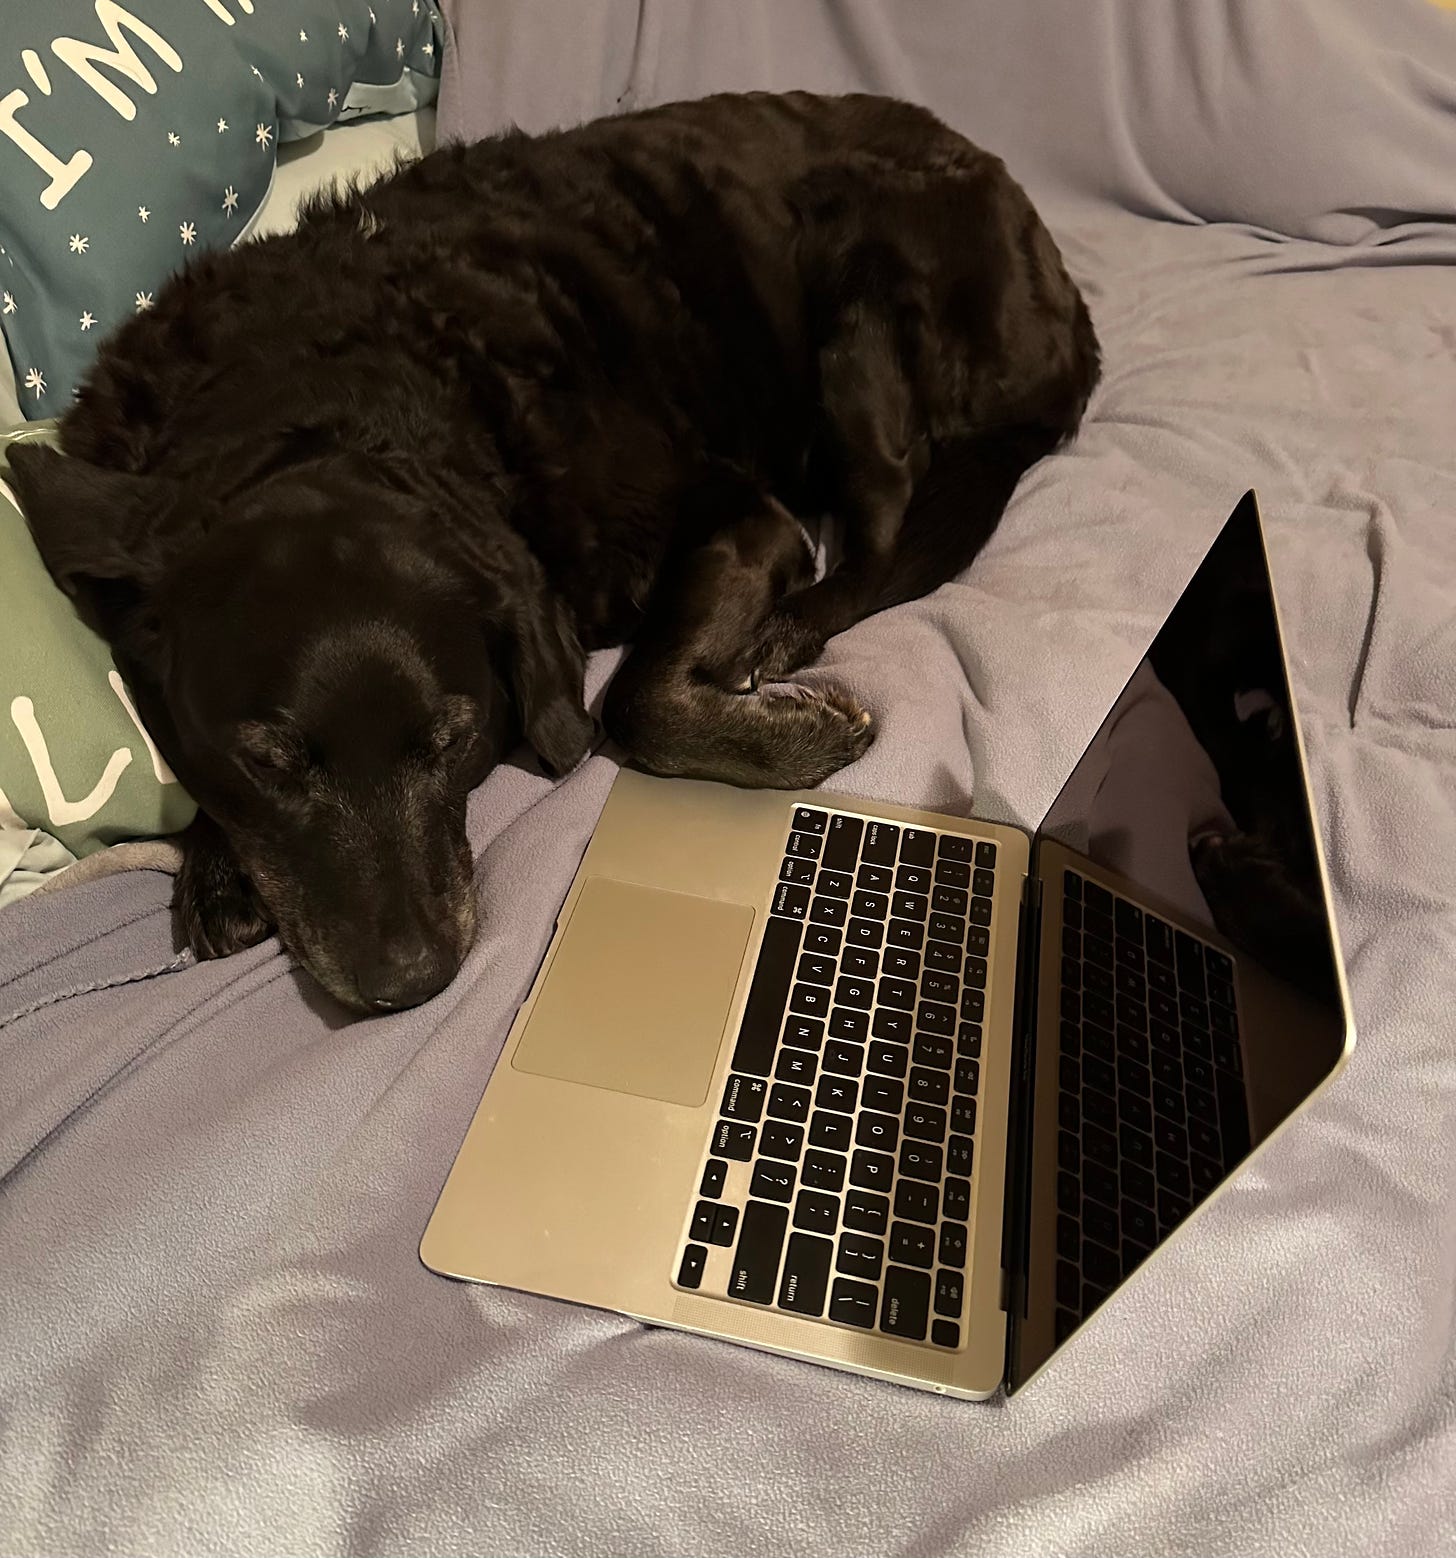 Ande the black lab lays next to my laptop on the bed with a light blue blanket and two pillows.